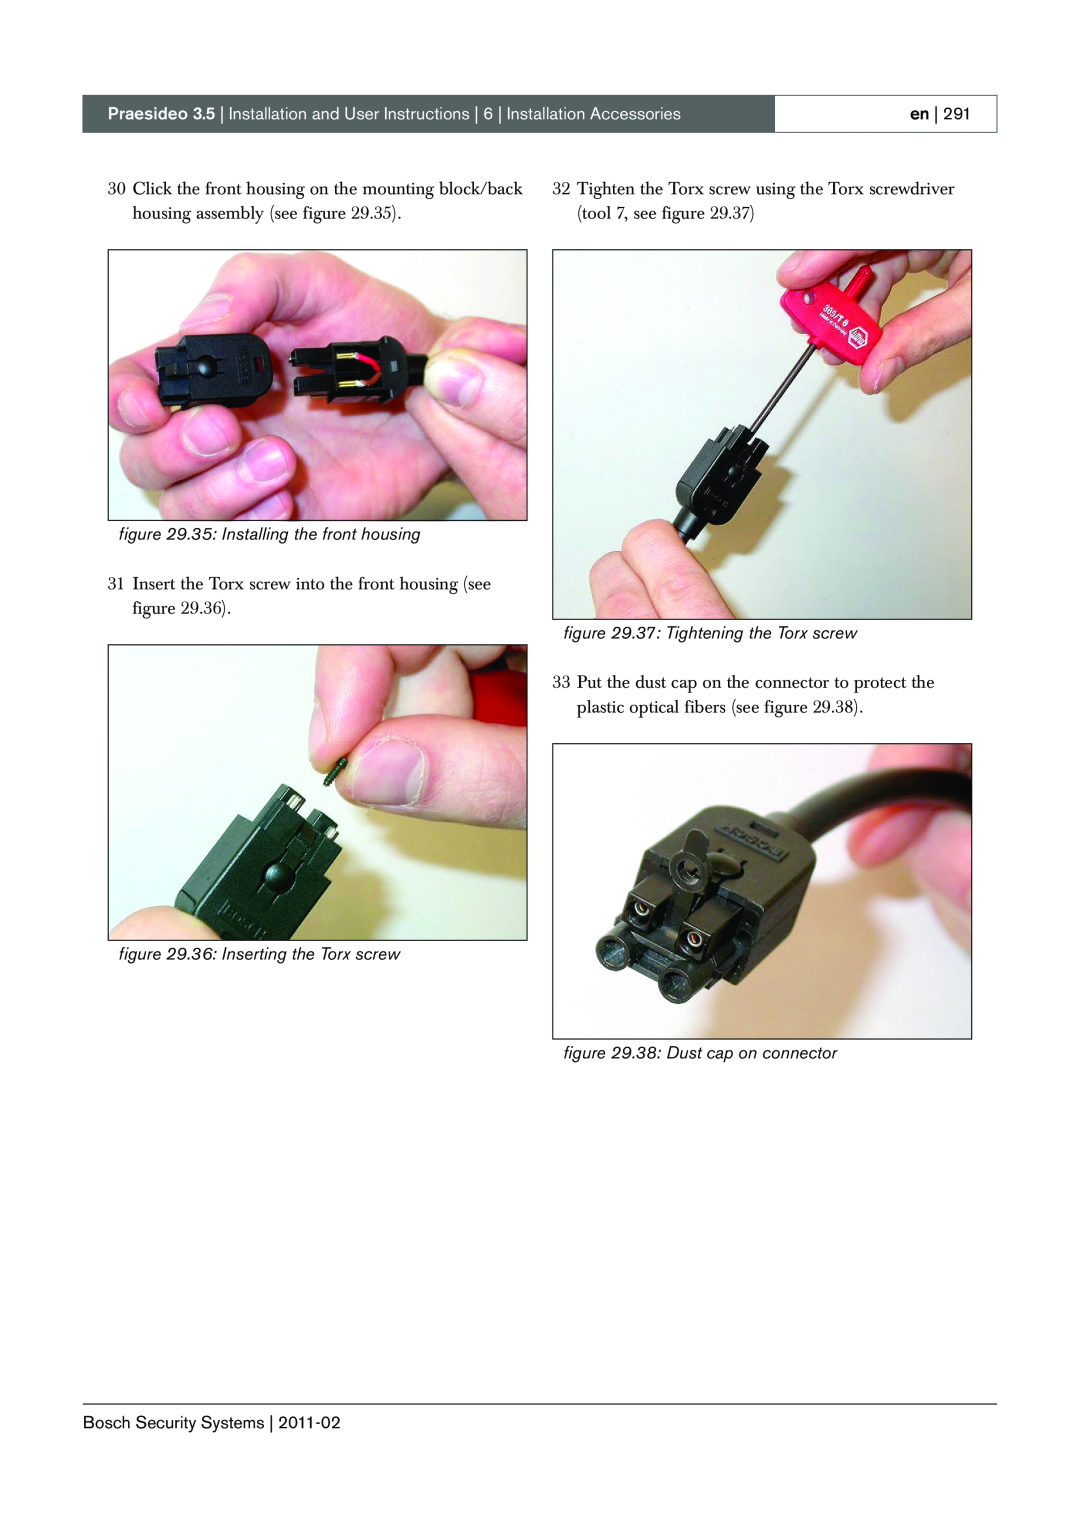 Bosch Appliances 3.5 manual 35: Installing the front housing, 36: Inserting the Torx screw, 37: Tightening the Torx screw 